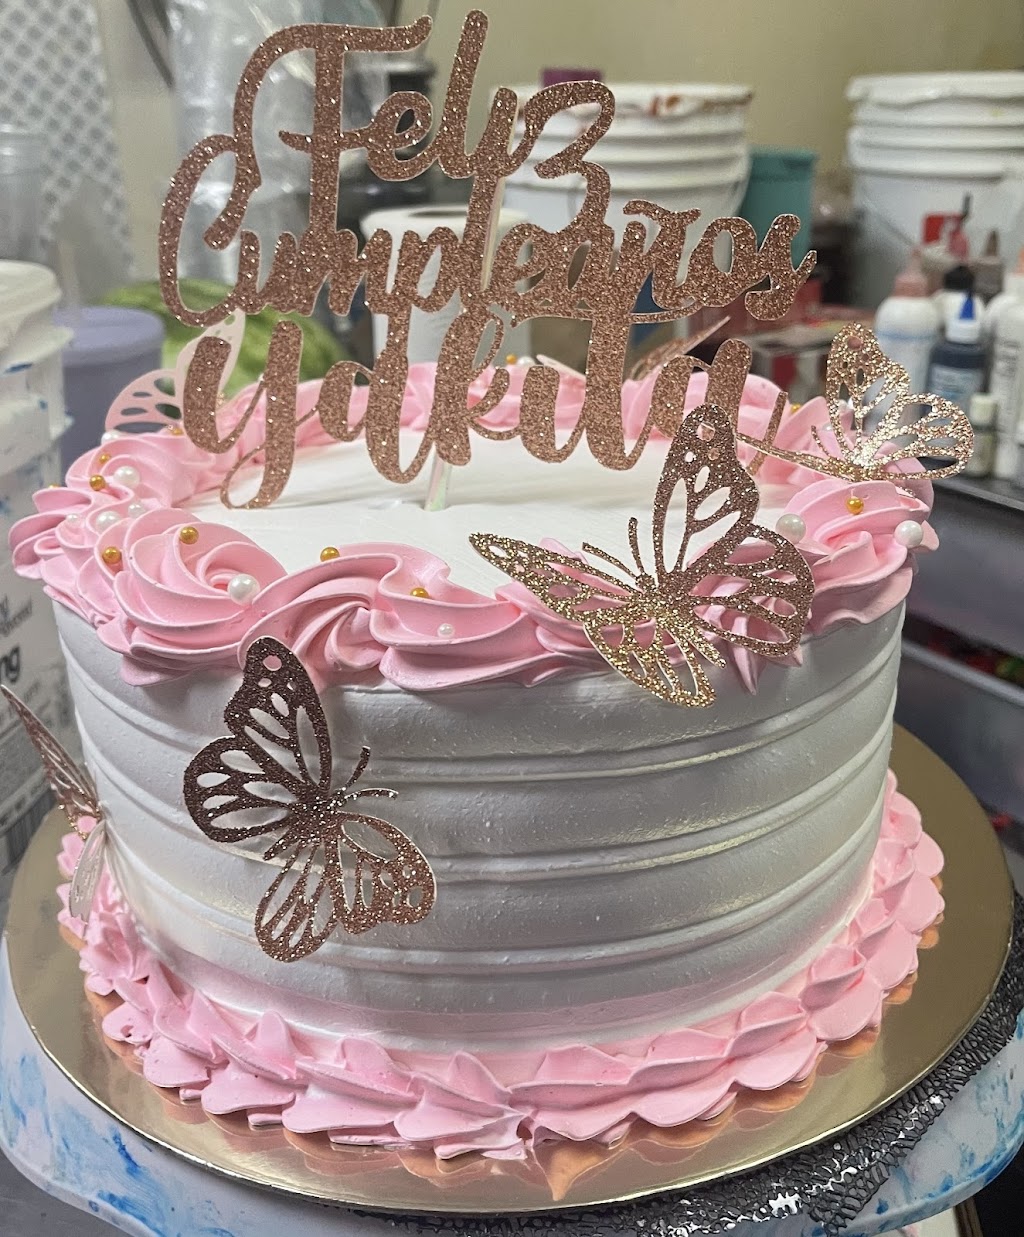 Stephanie and Anthony Bakery | 239 Second Ave, Brentwood, NY 11717 | Phone: (631) 530-5113